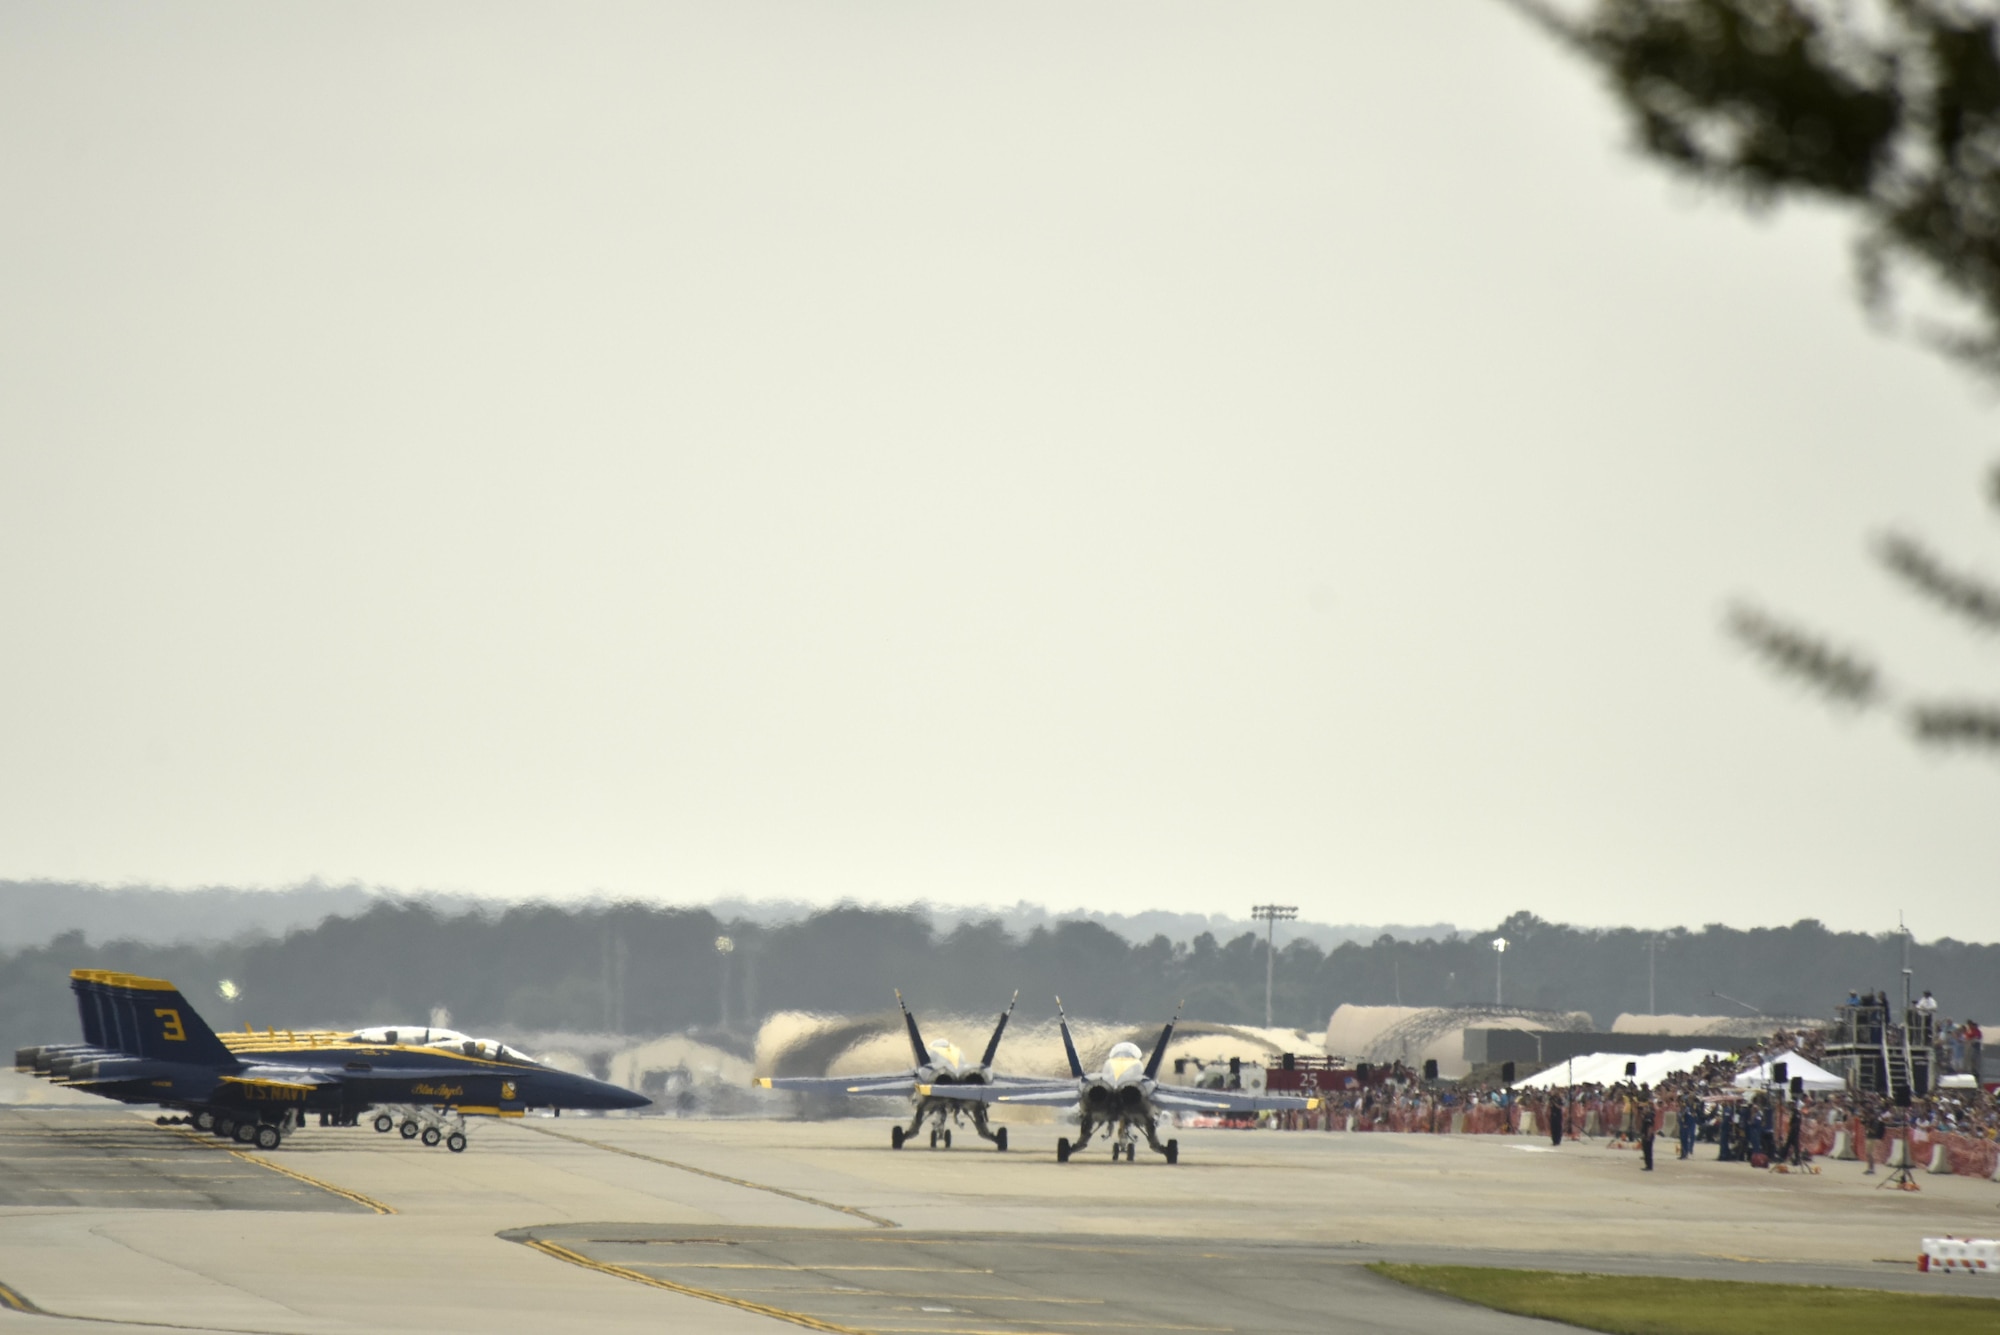 Spectators watch as the U.S. Navy Blue Angels prepare to perform during the Wings Over Wayne Air Show, May 21, 2017, at Seymour Johnson Air Force Base, North Carolina. The Blue Angels have performed for more than 500 million fans since 1946. (U.S. Air Force photo by Airman 1st Class Christopher Maldonado)